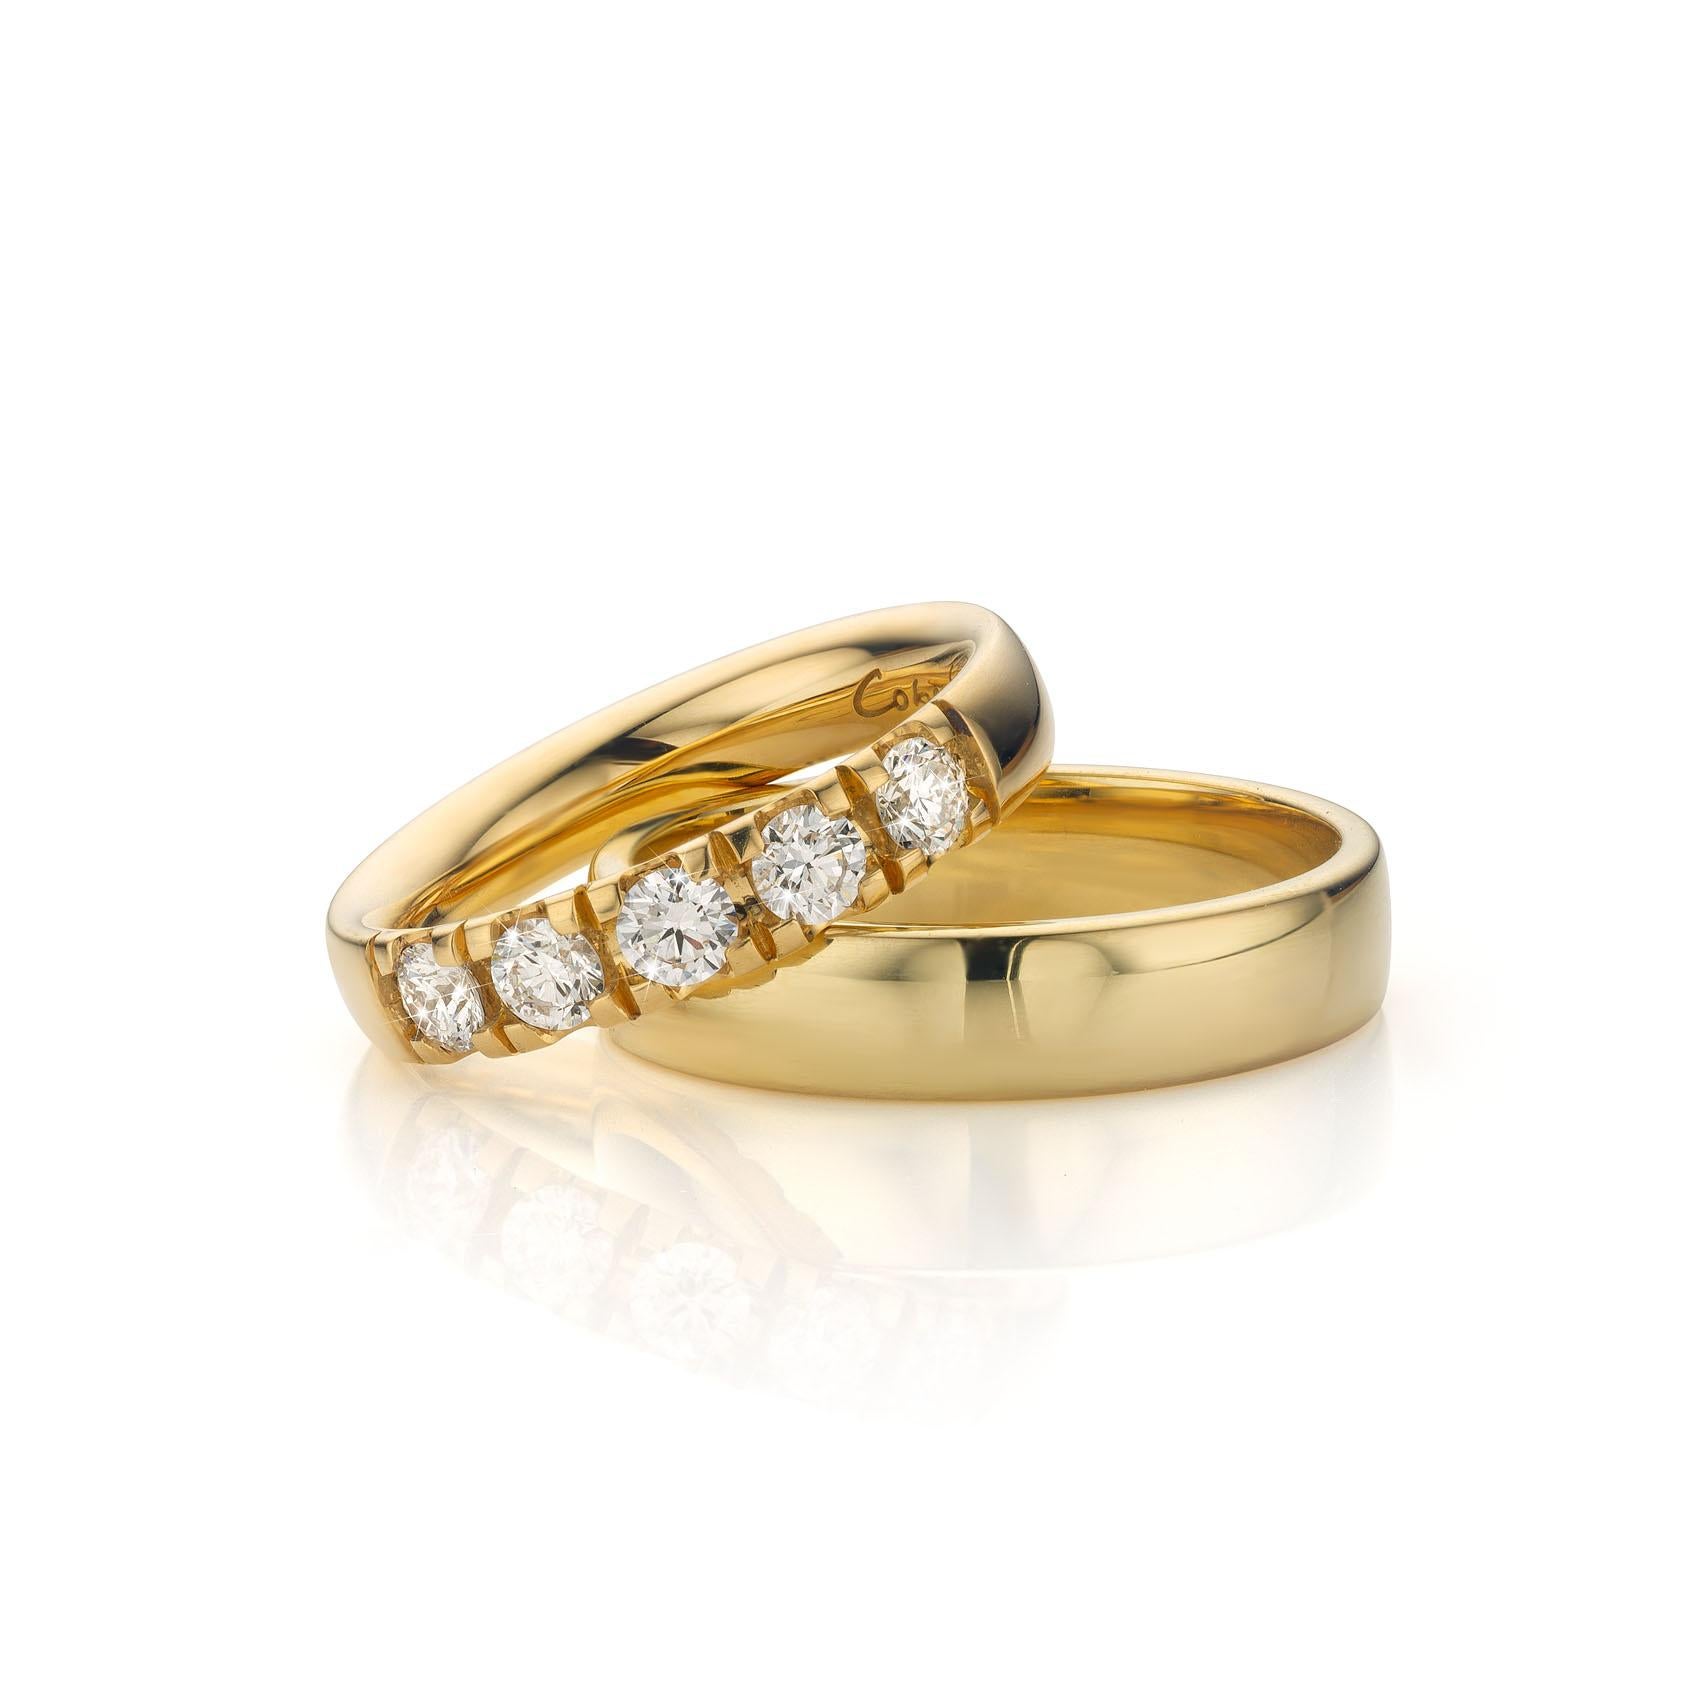 Brilliant Cut Cober Jewellery yellow gold with 0.15Ct diamonds in ladies Wedding Rings For Sale